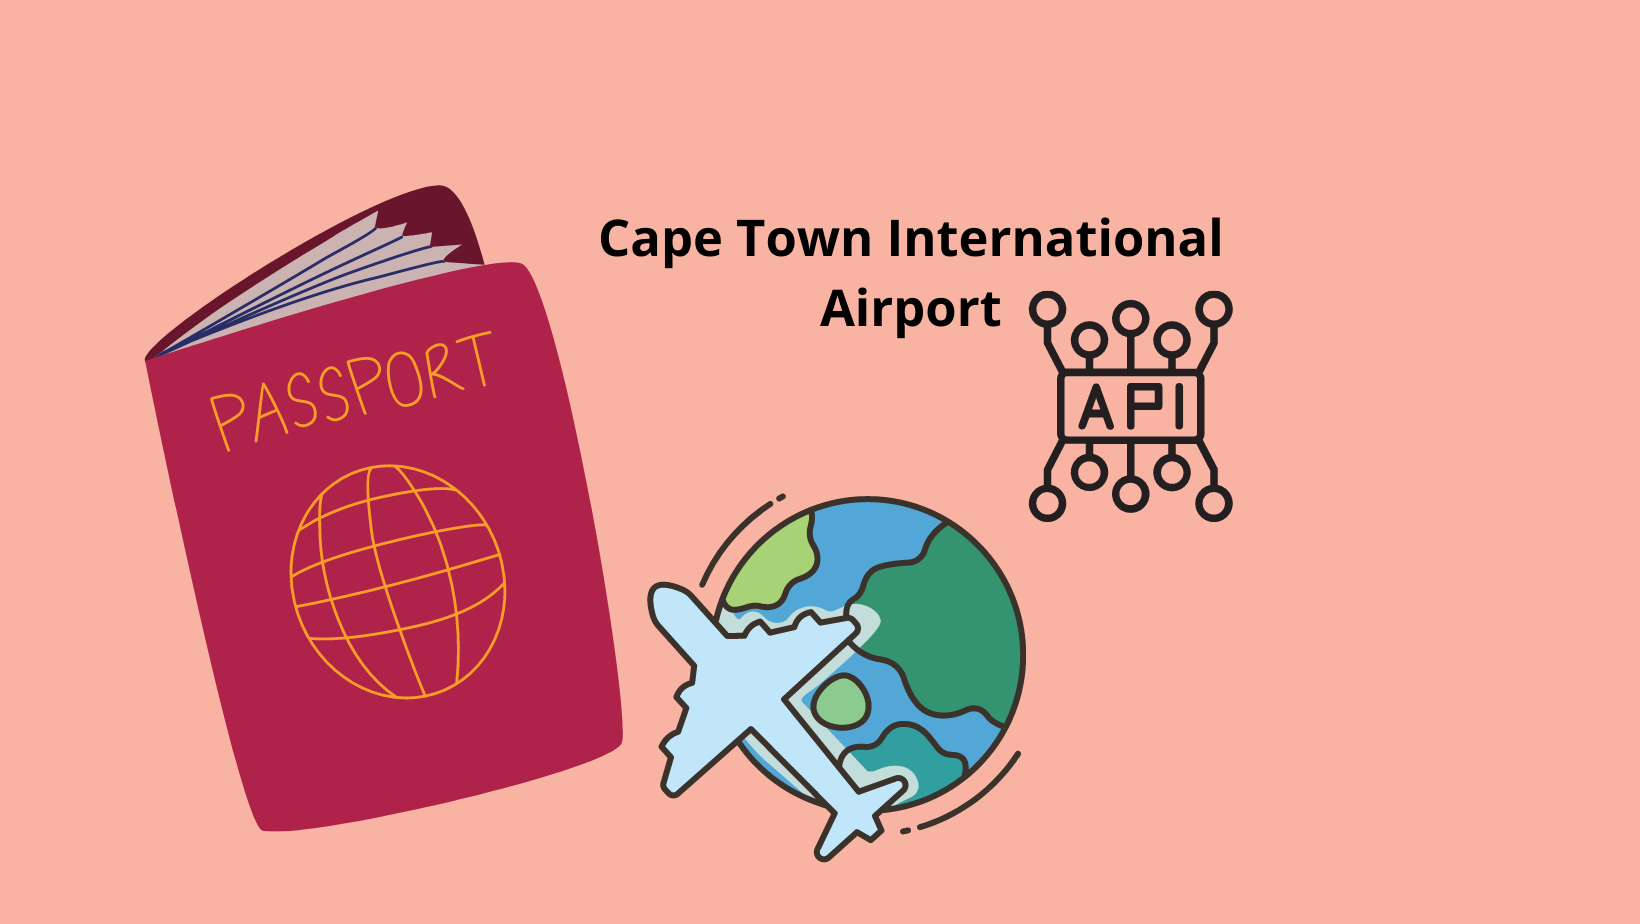 Check The Flight Status Of Cape Town International Airport Using An AP